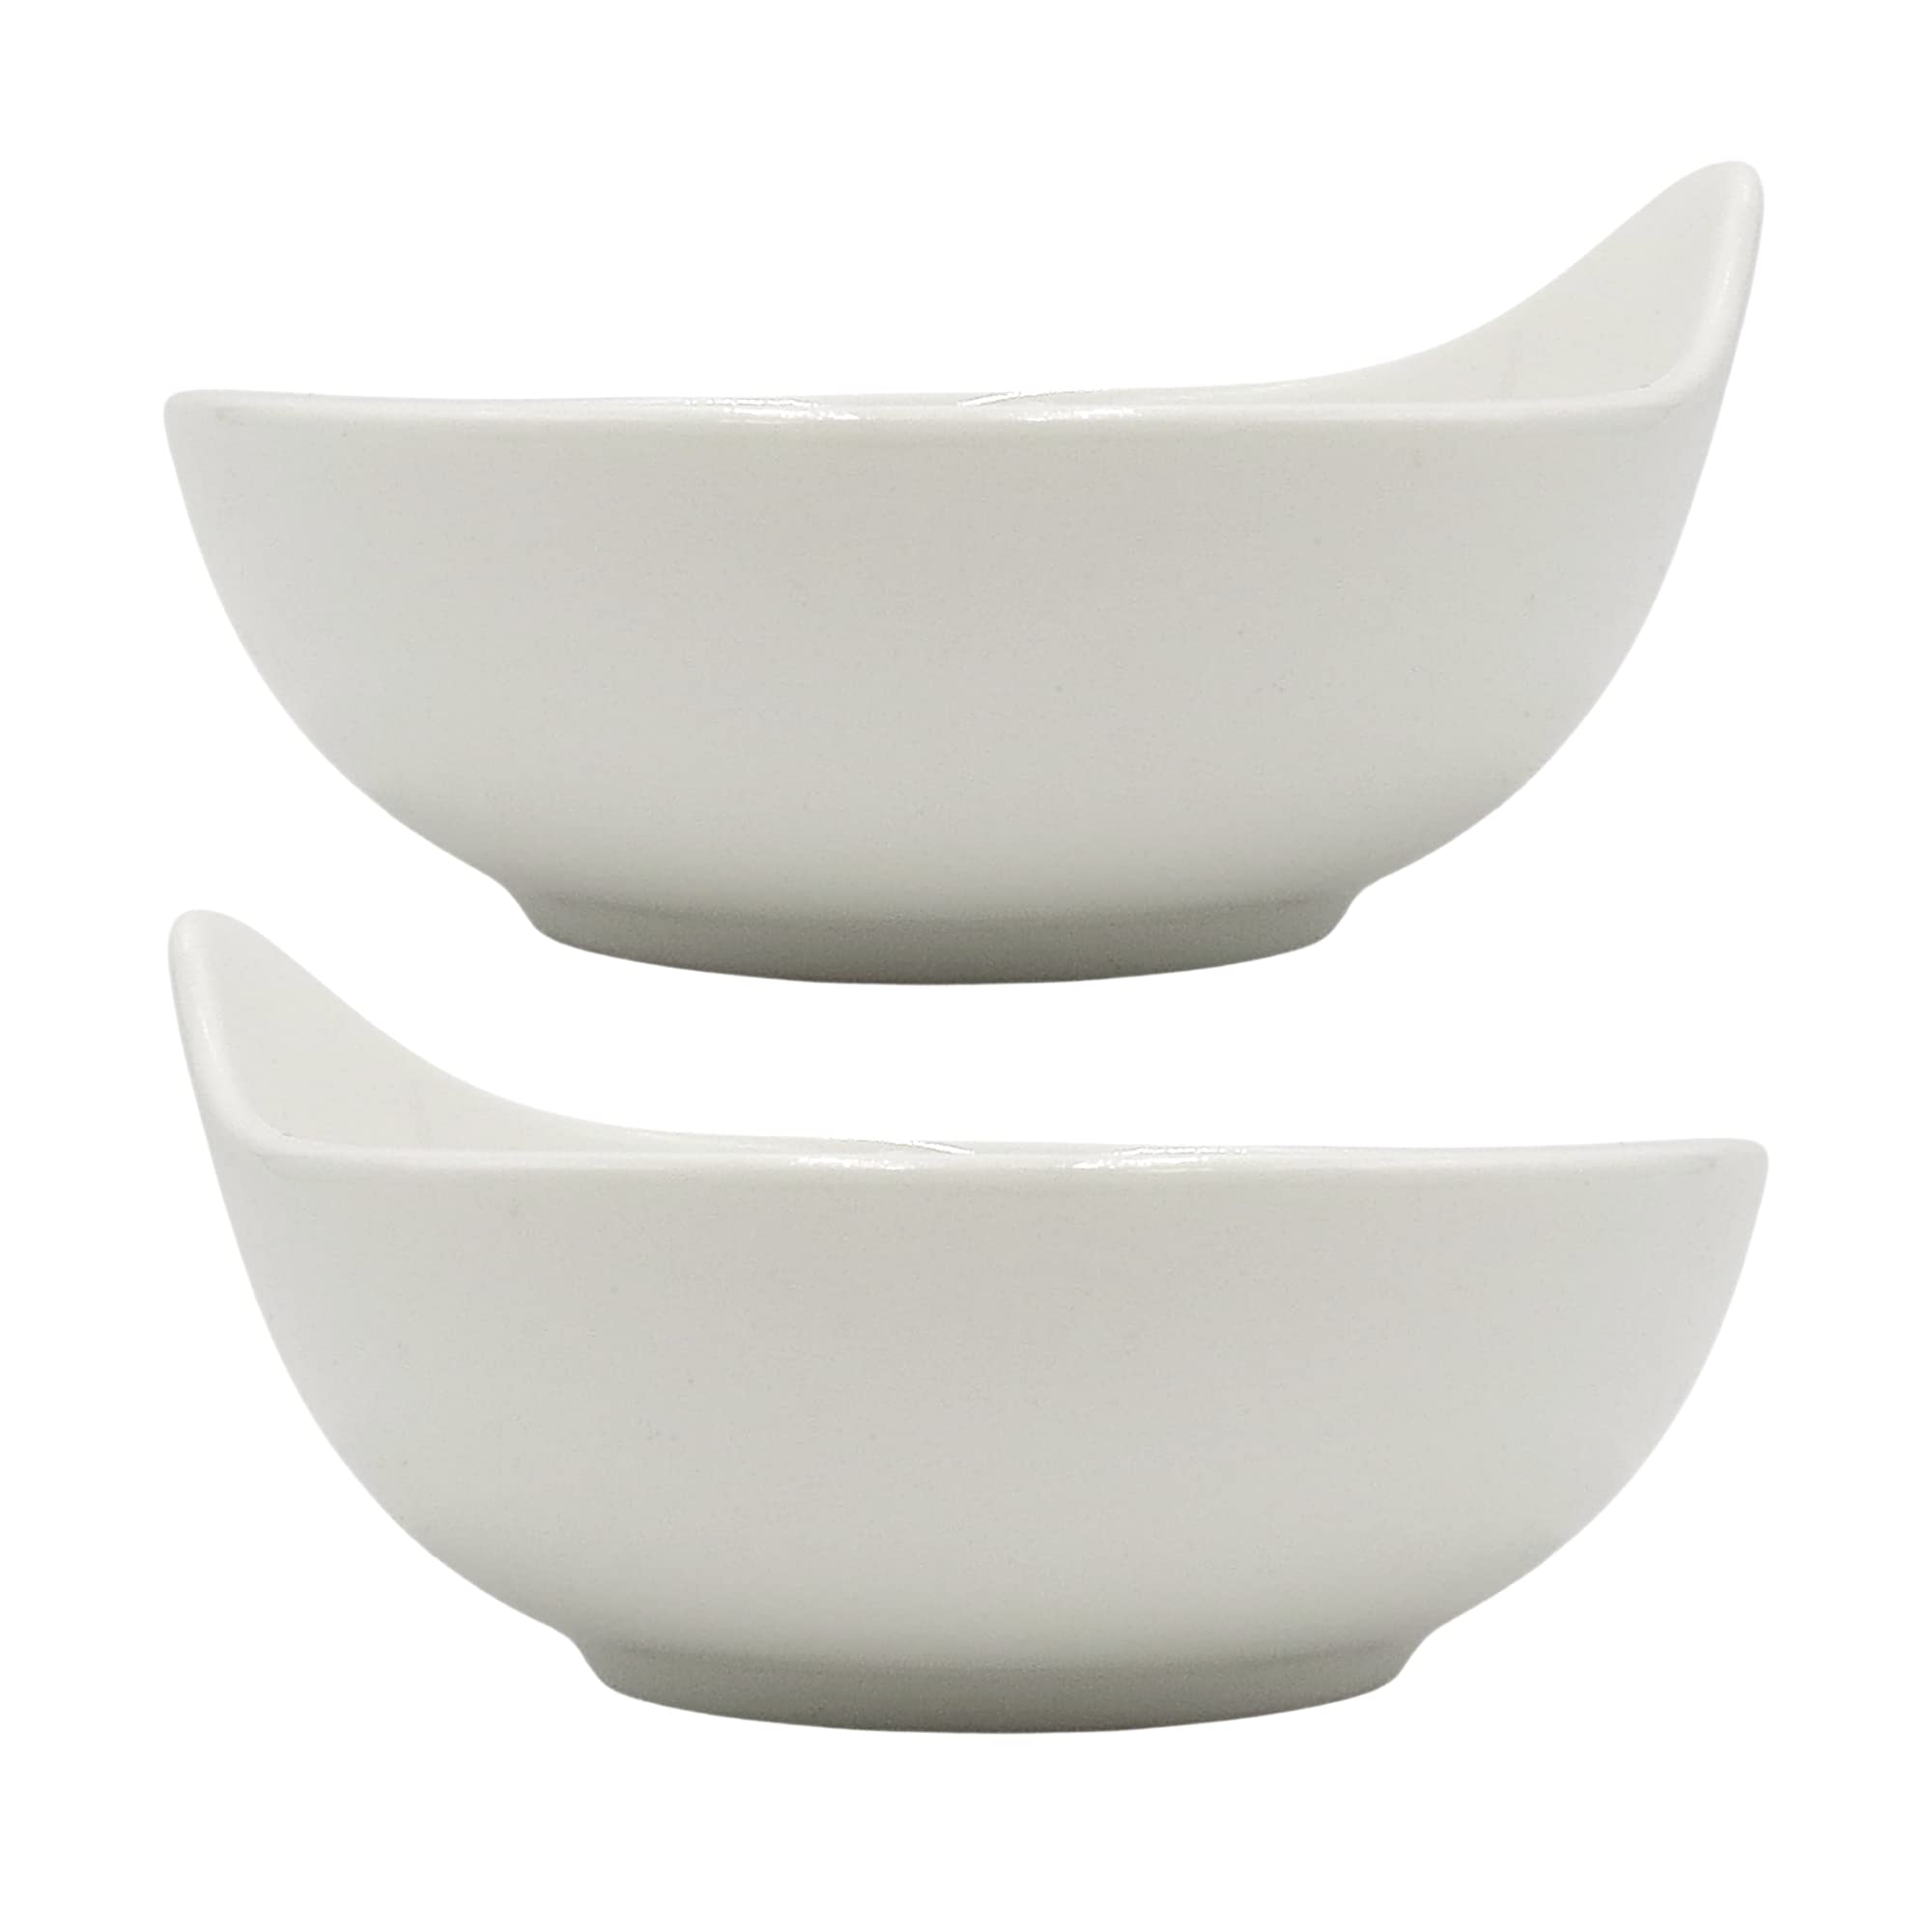 Needzo White Melamine French Onion Soup Bowls, Microwave Safe Bowl for Soups, Stews, Chilis, Baked Beans, and More, Set of 2